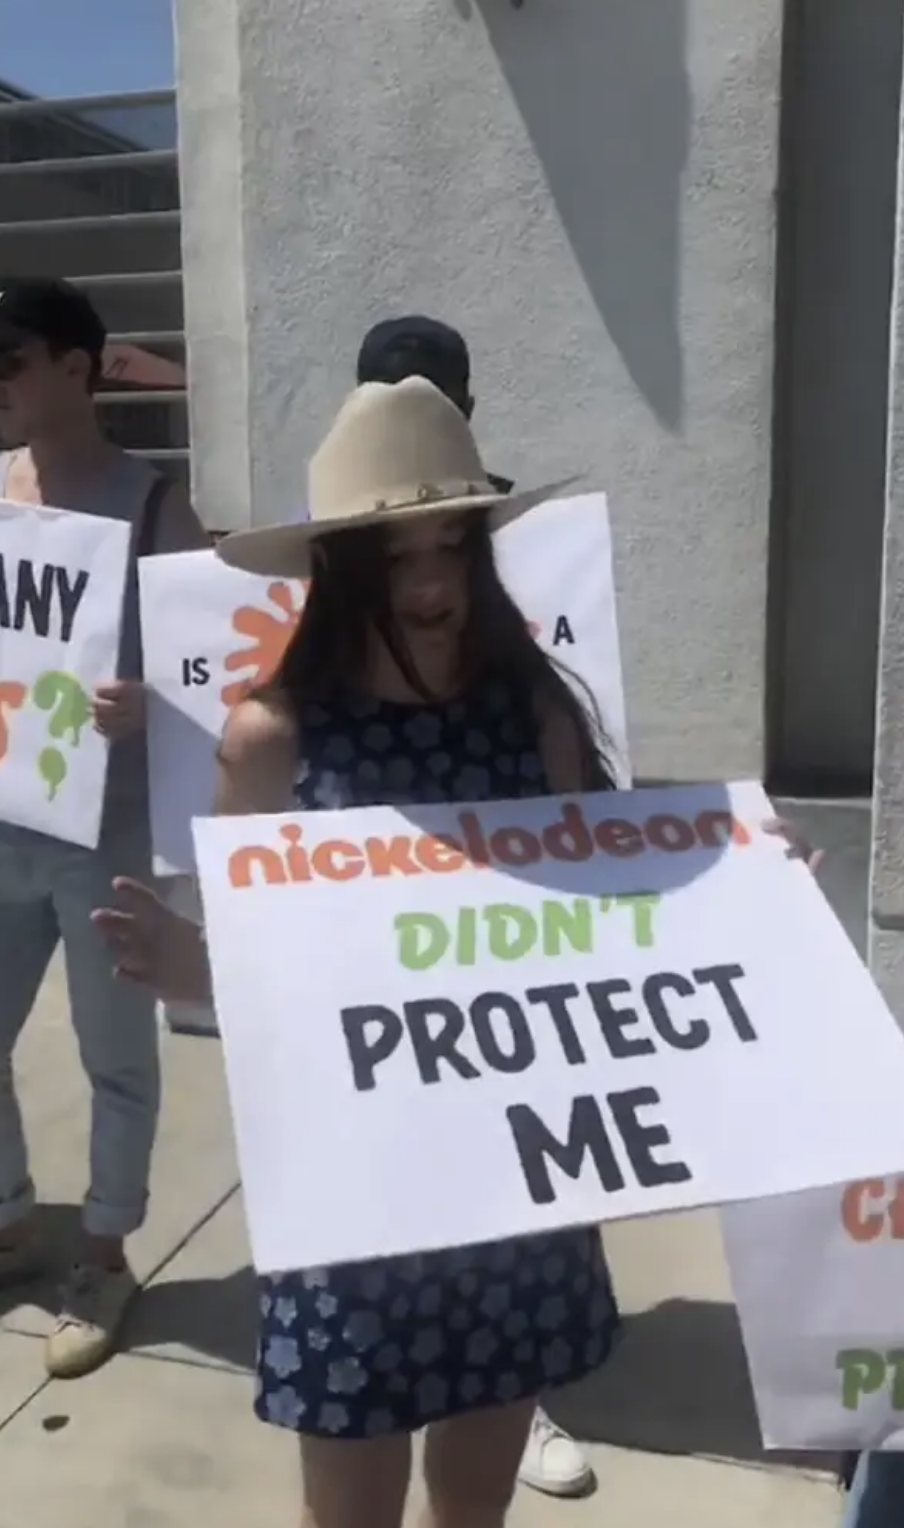 Alexa holding a sign that says &quot;Nickelodeon didn&#x27;t protect me&quot;